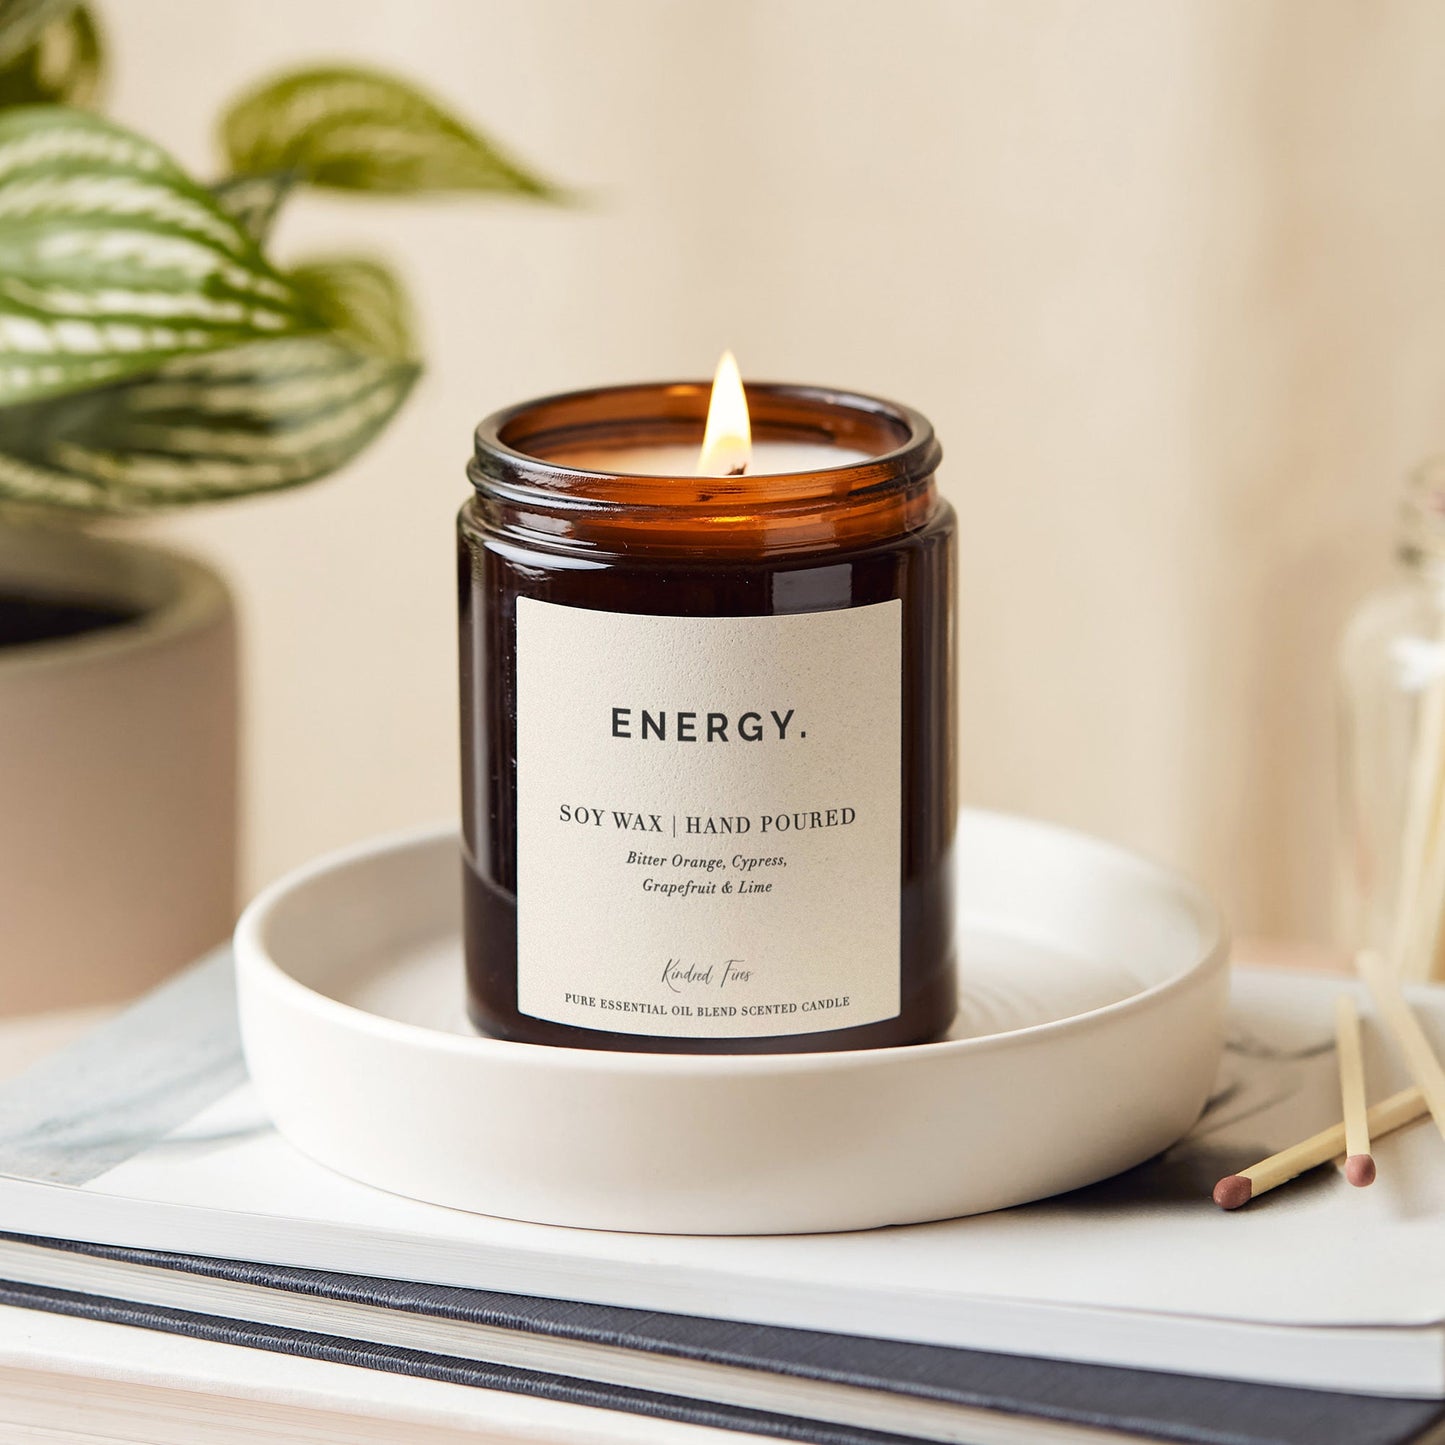 Energy Aromatherapy Candles - Kindred Fires